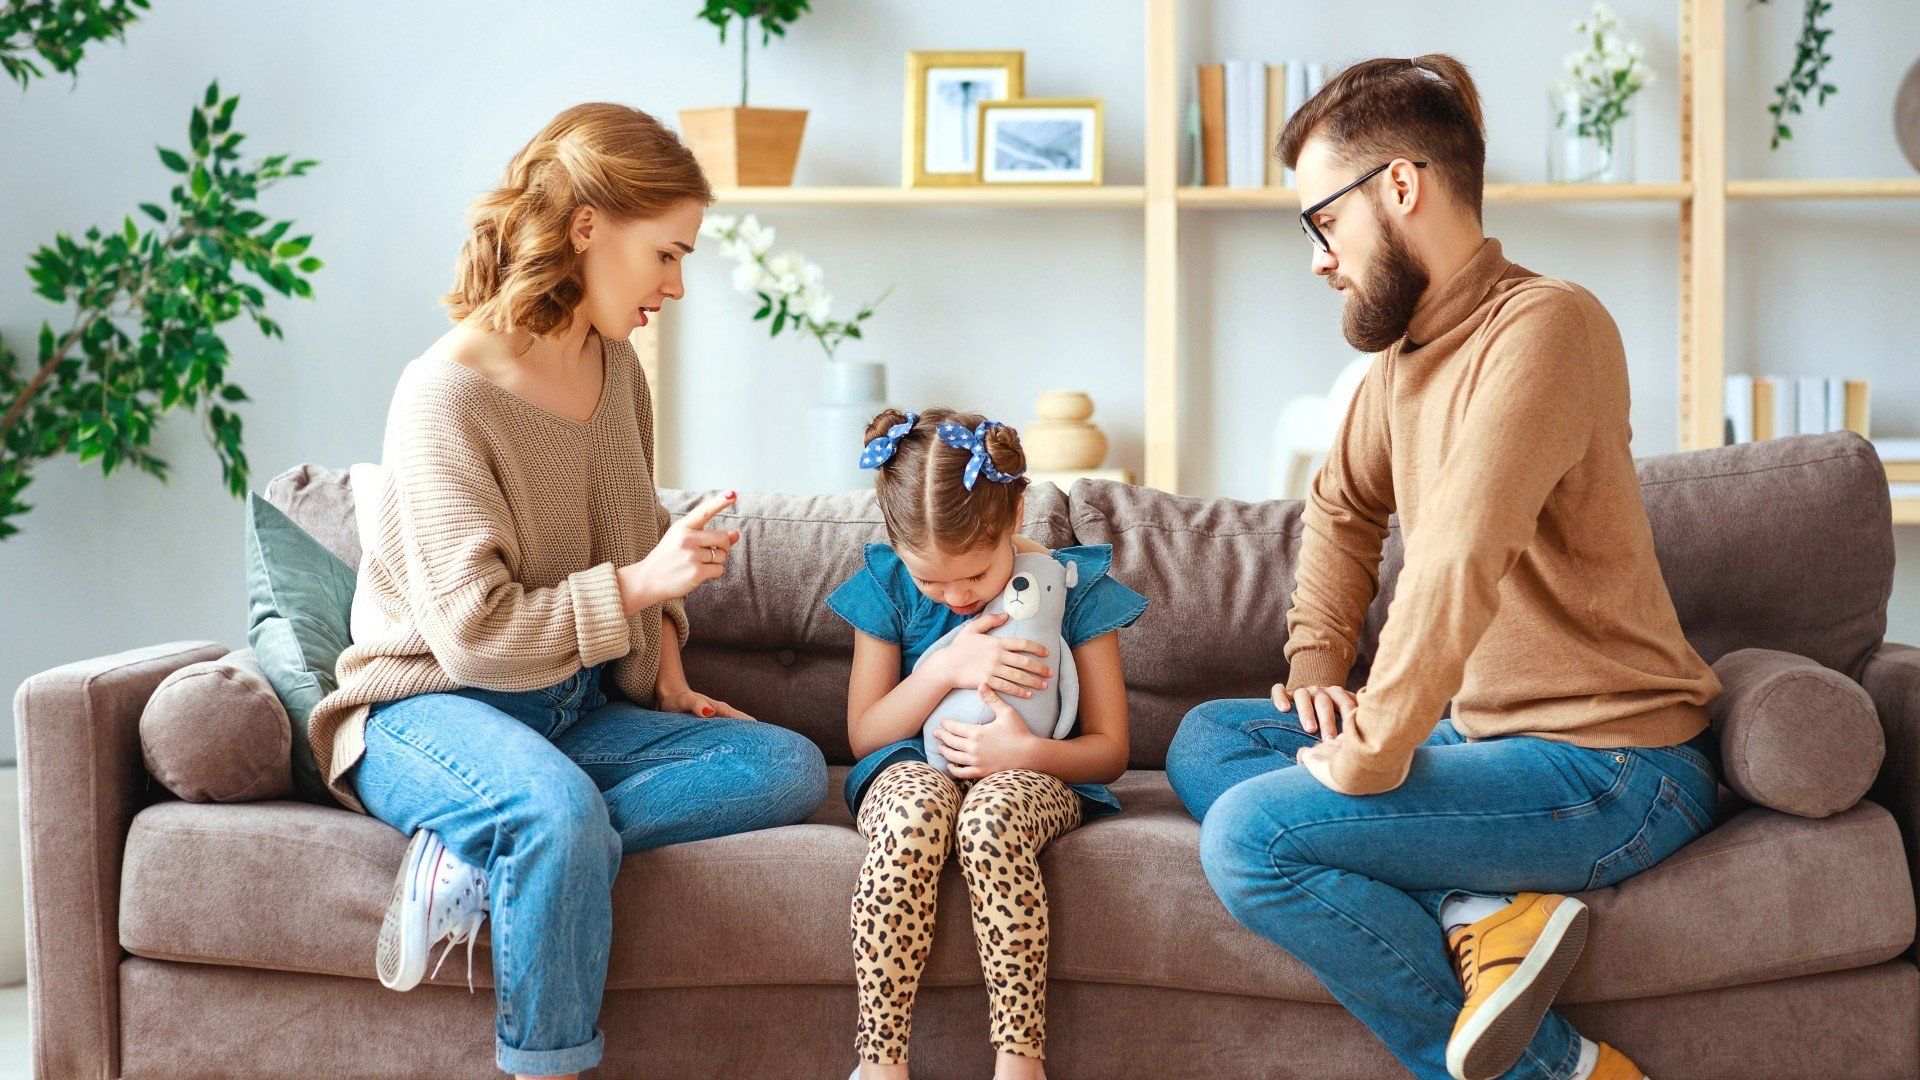 sad child sitting between mother and father on a couch pending divorce and custody hearing